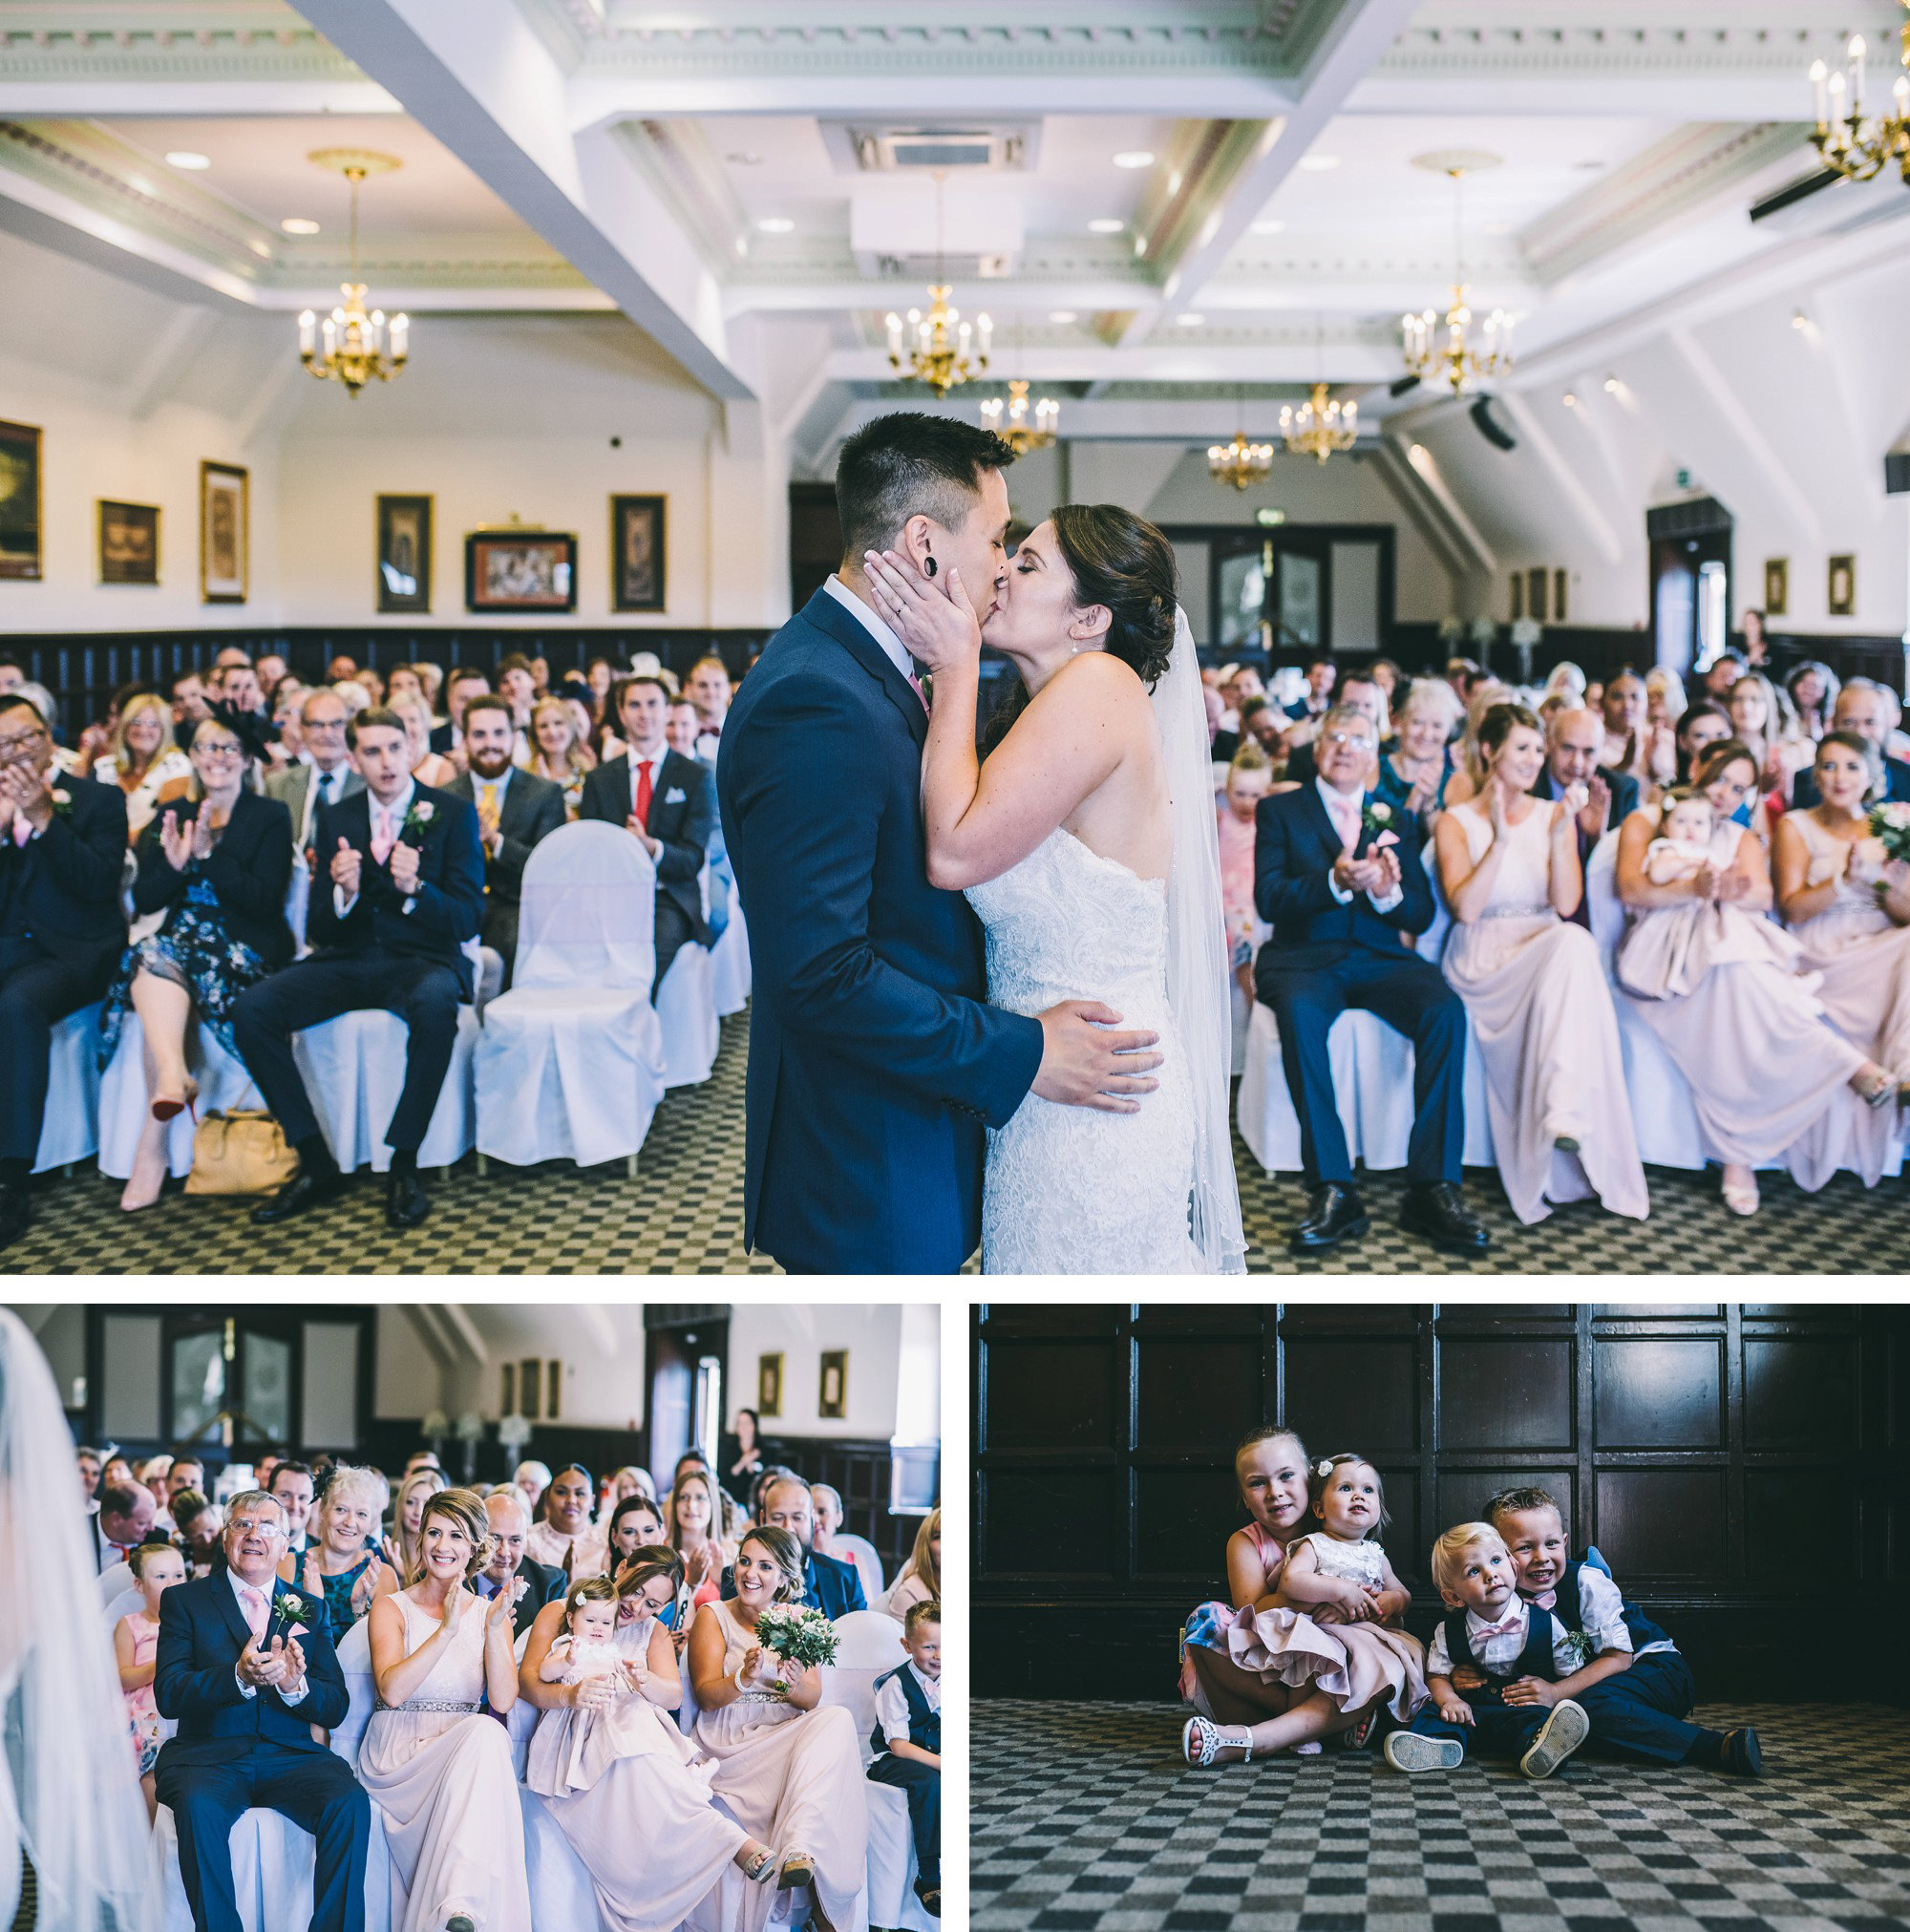 dunston-hall-wedding-in-norwich-james-powell-photography-010